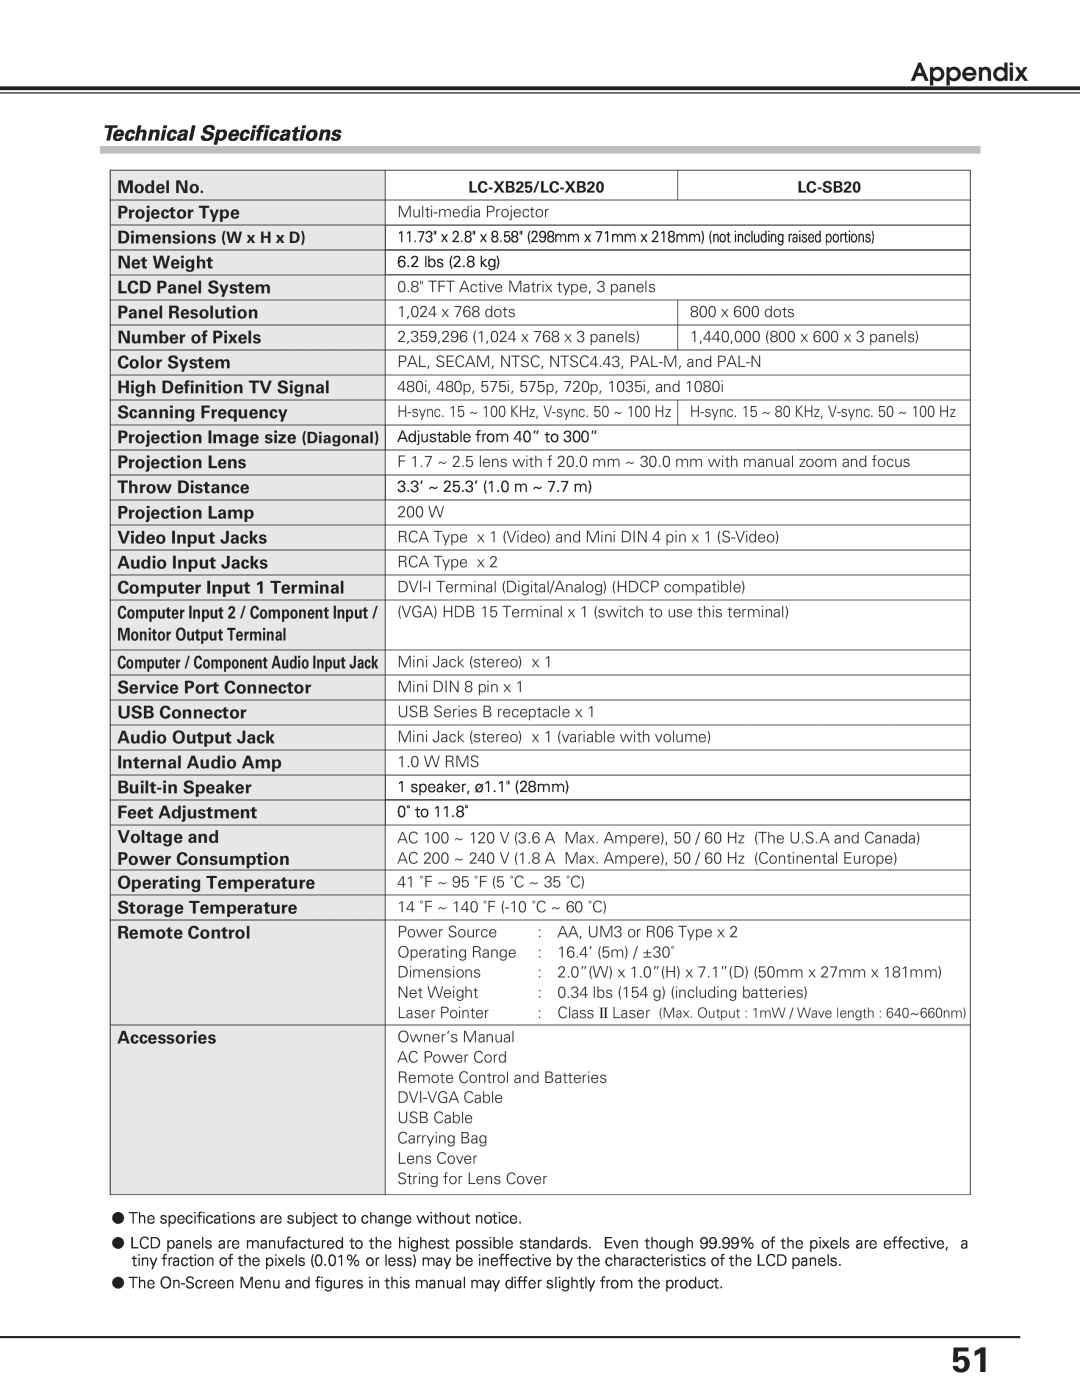 Eiki LC-SB20, LC-XB25, LC-XB20 owner manual Technical Specifications, Appendix 